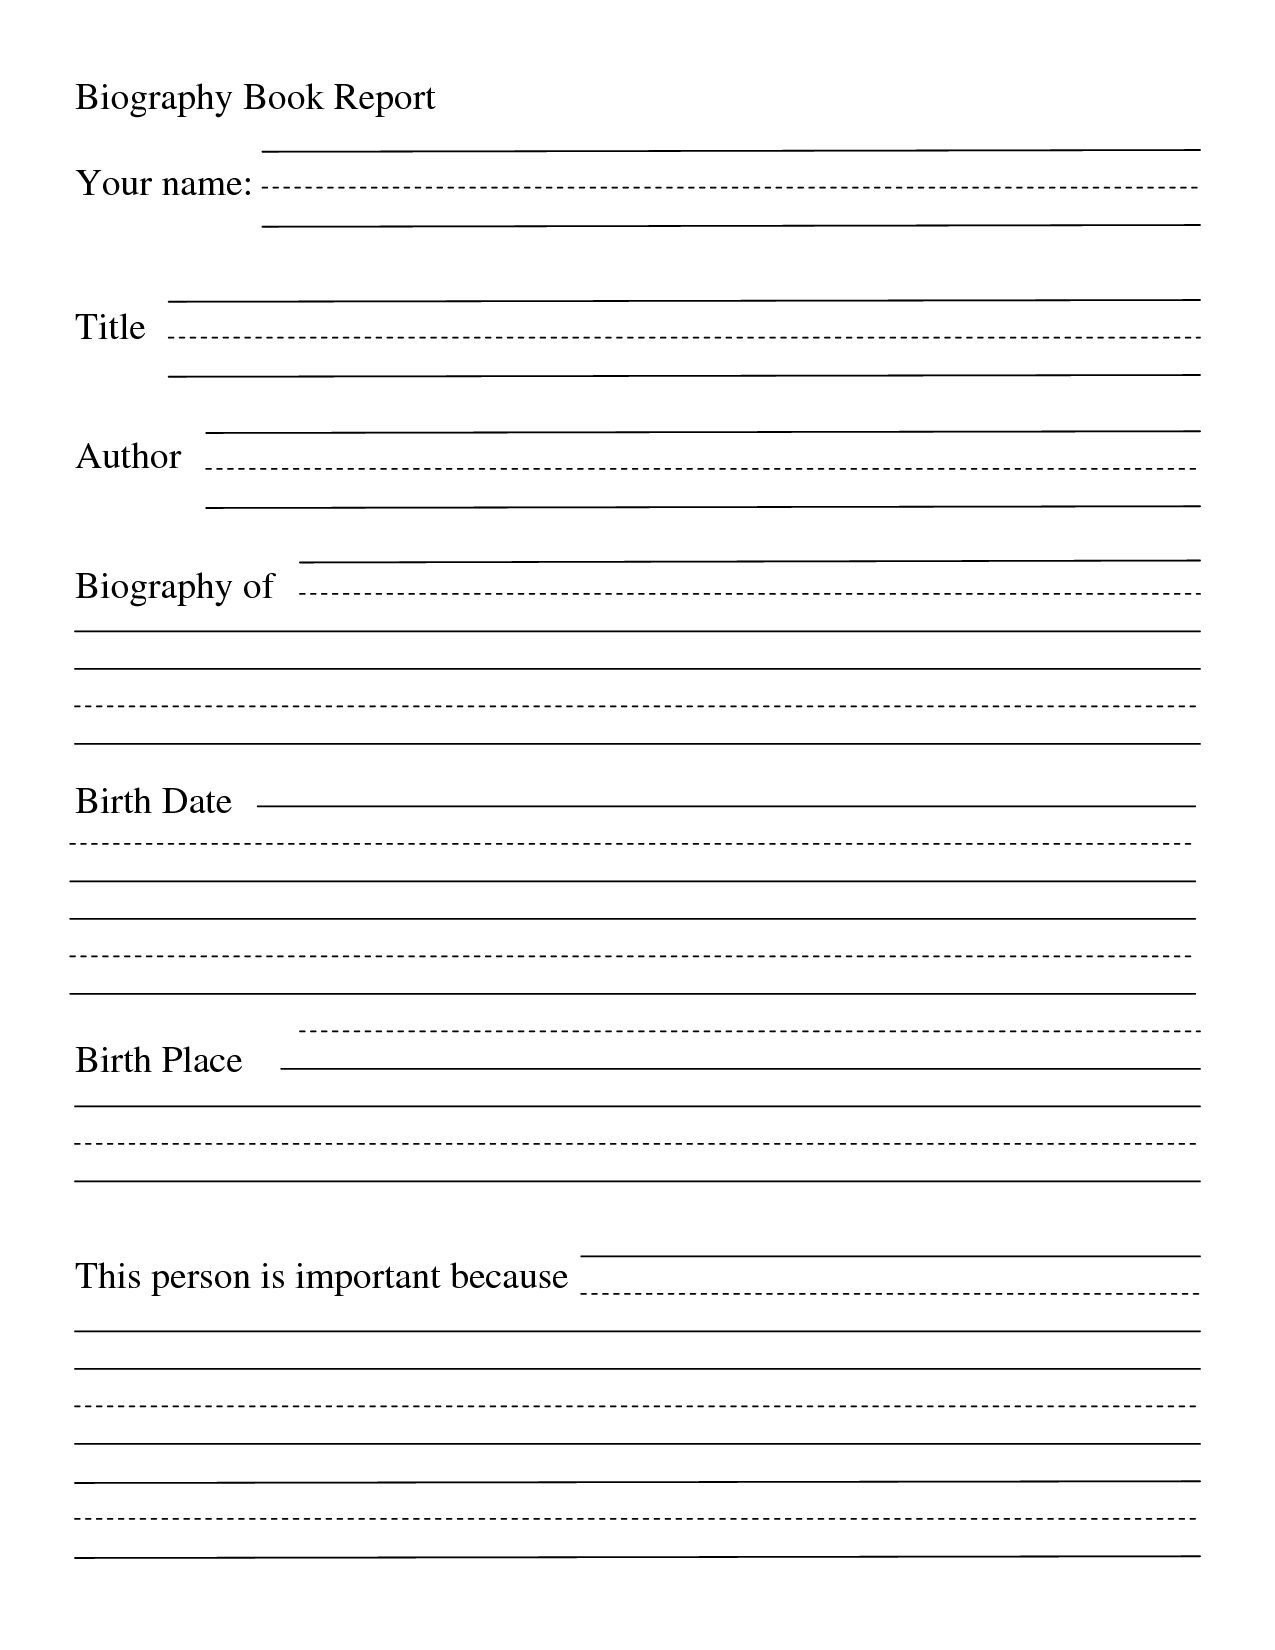 Biography Outline Worksheet | Printable Worksheets And Inside Biography Book Report Template